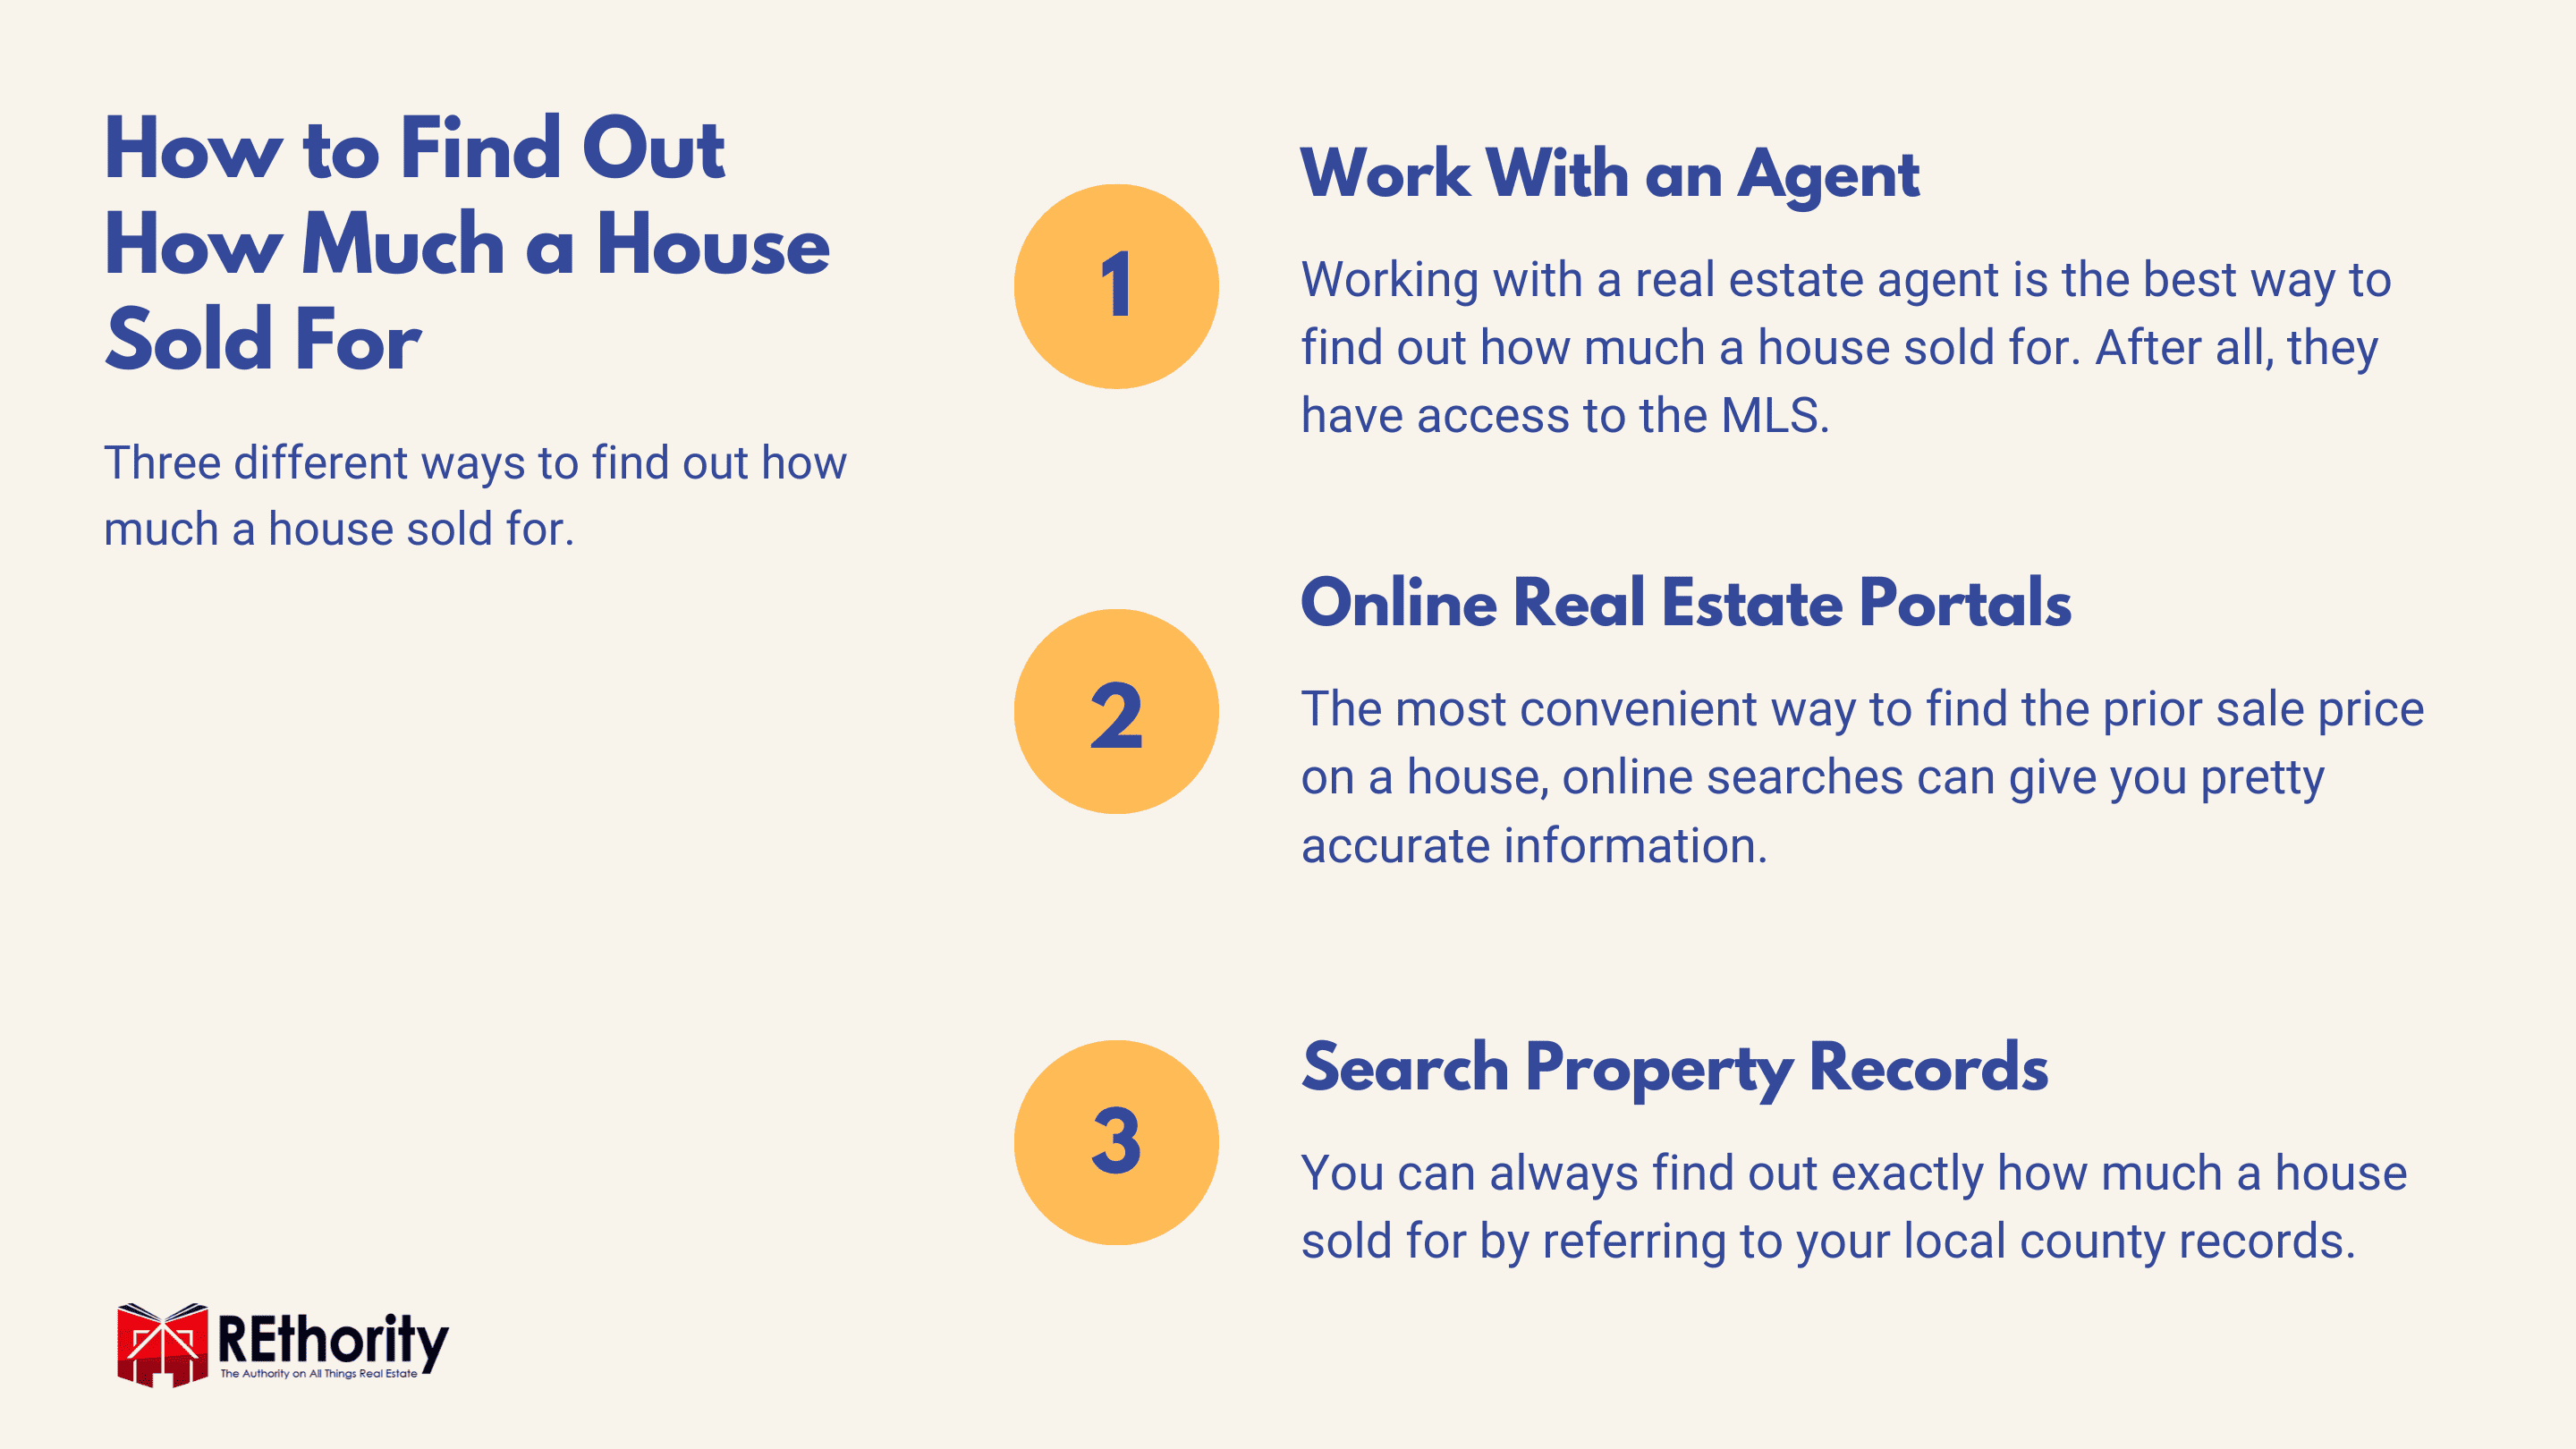 How to Find Out How Much a House Sold For graphic showing three common methods for looking up recent home sale prices